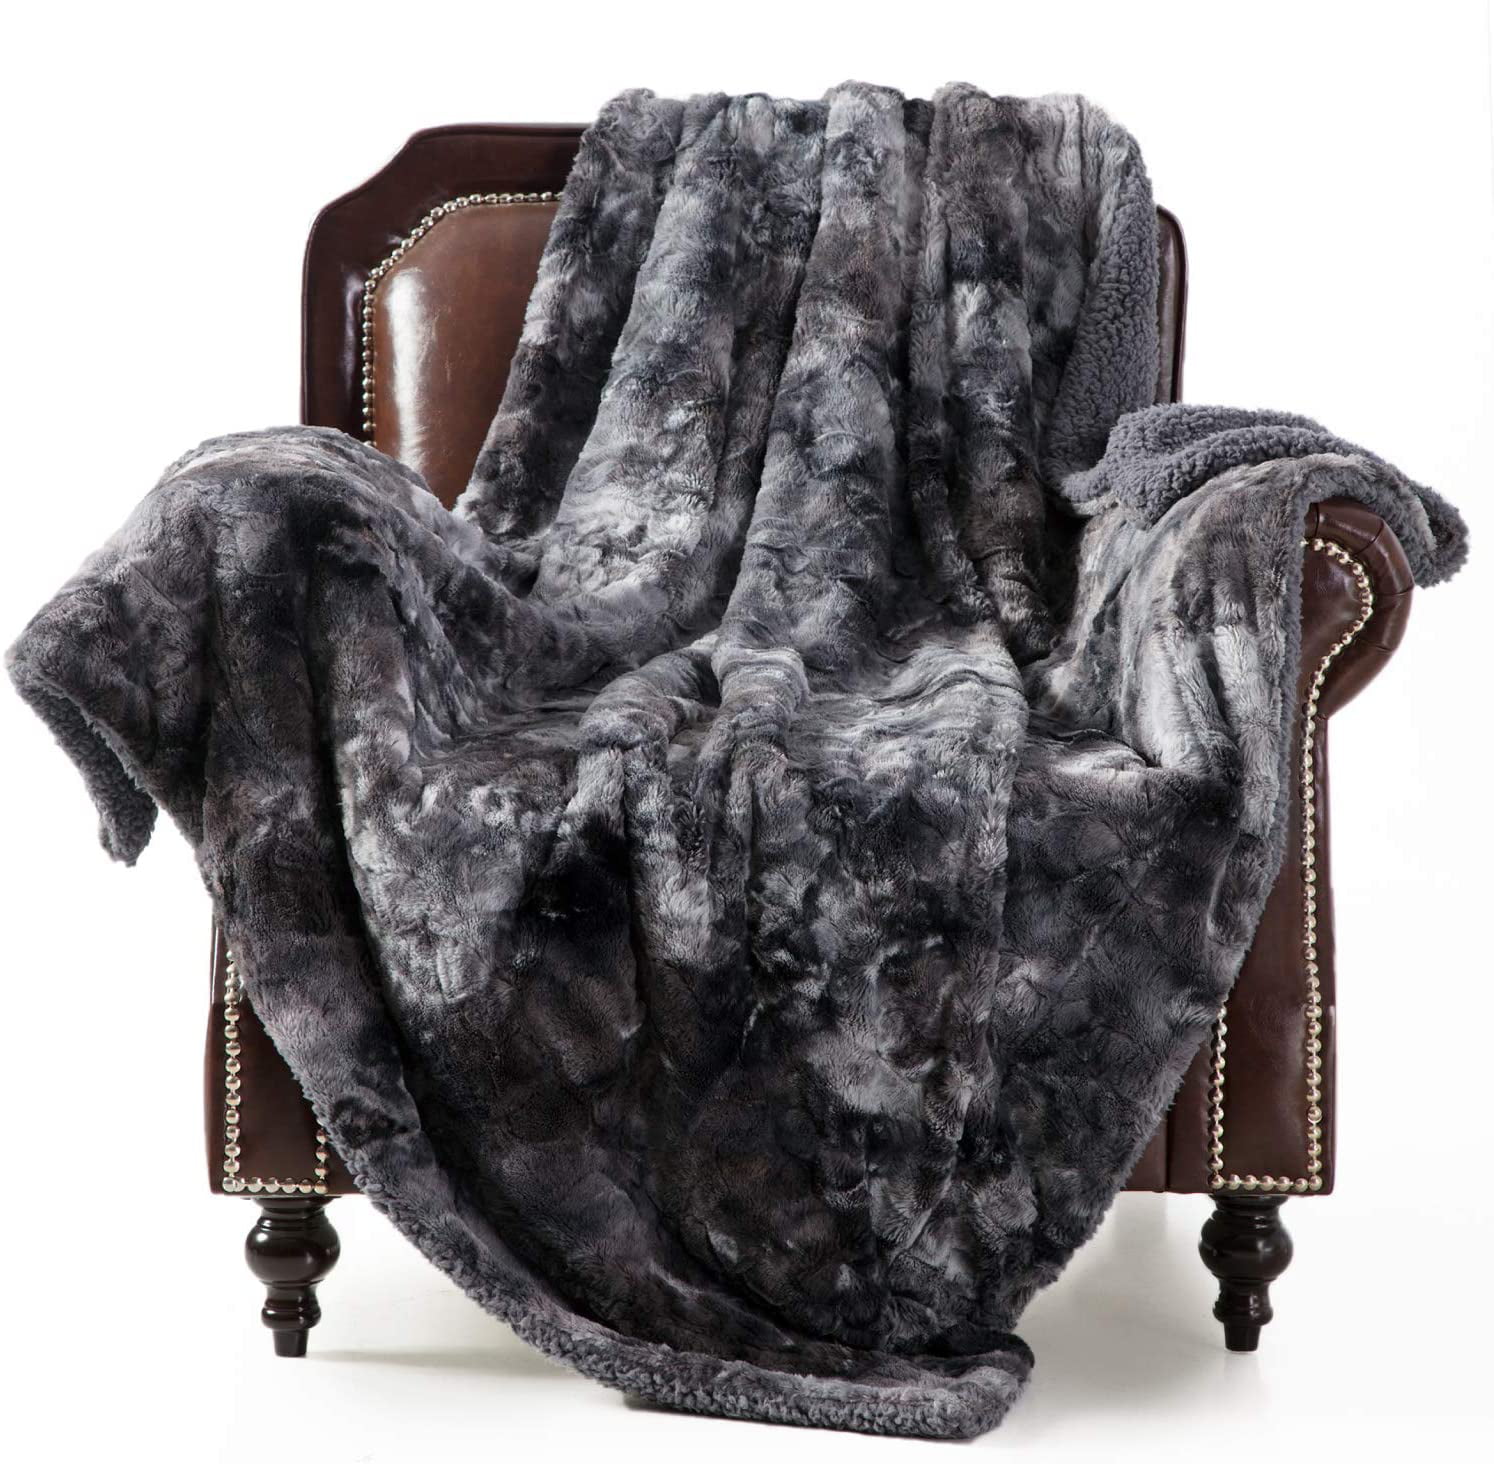 Couch And Bed Bedsure Faux Fur Reversible Tie-Dye Sherpa Throw Blanket For Sofa 